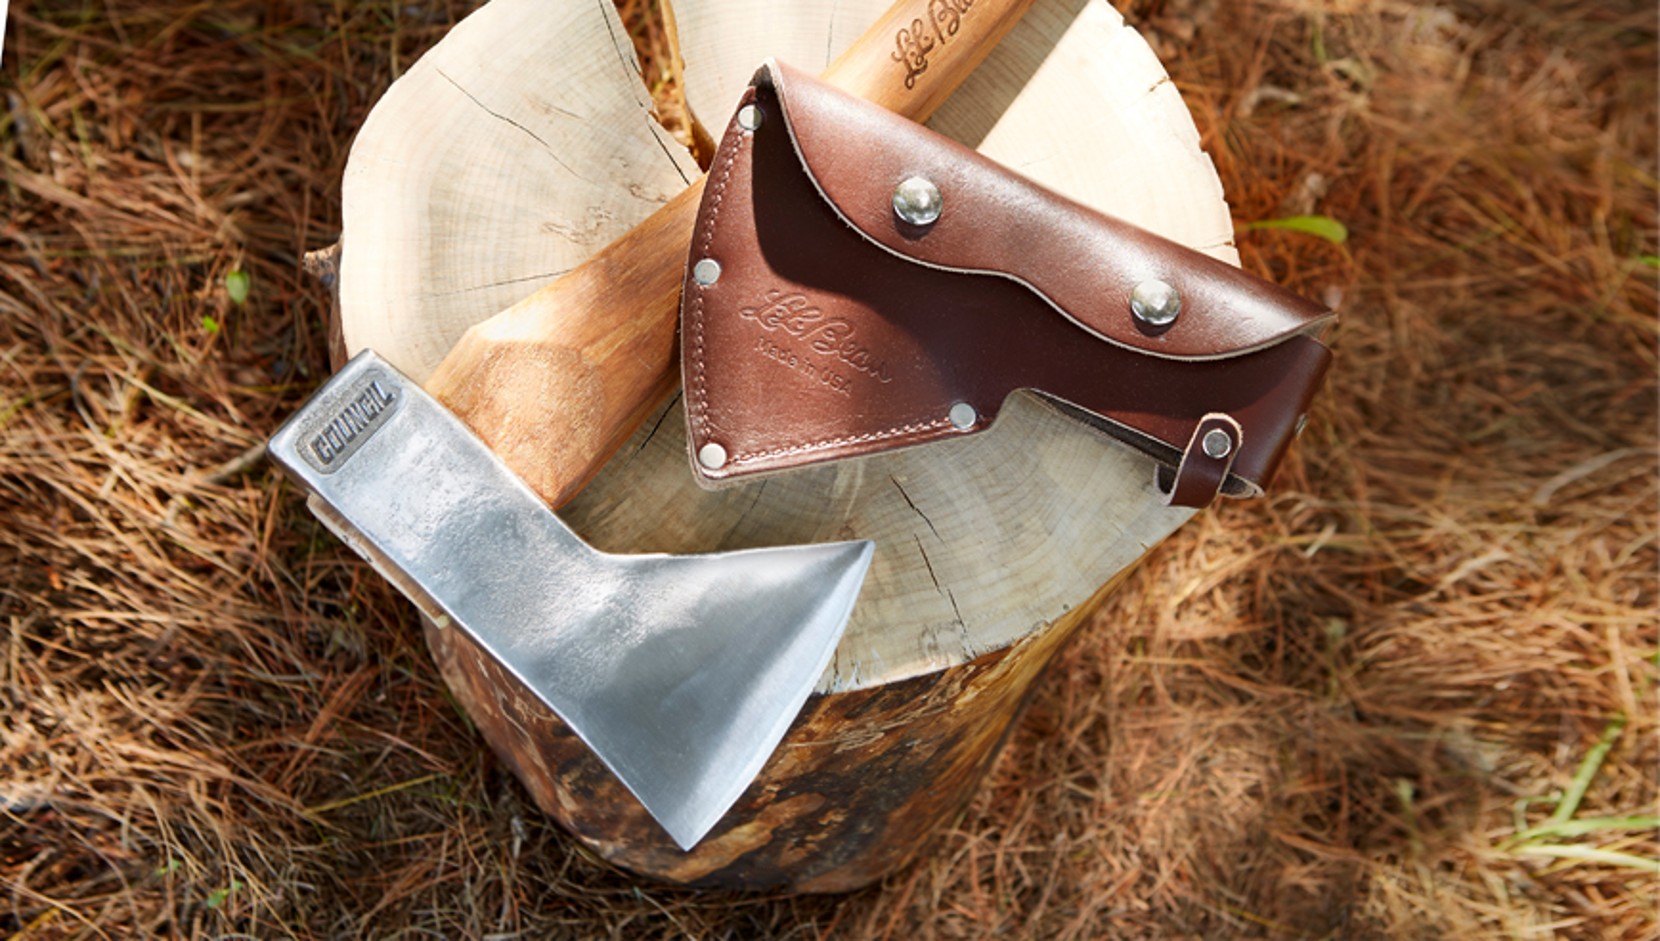 Hudson Bay Cruiser Axe. First used in North America as a trading piece, this axe is great for use at the camp or campsite.